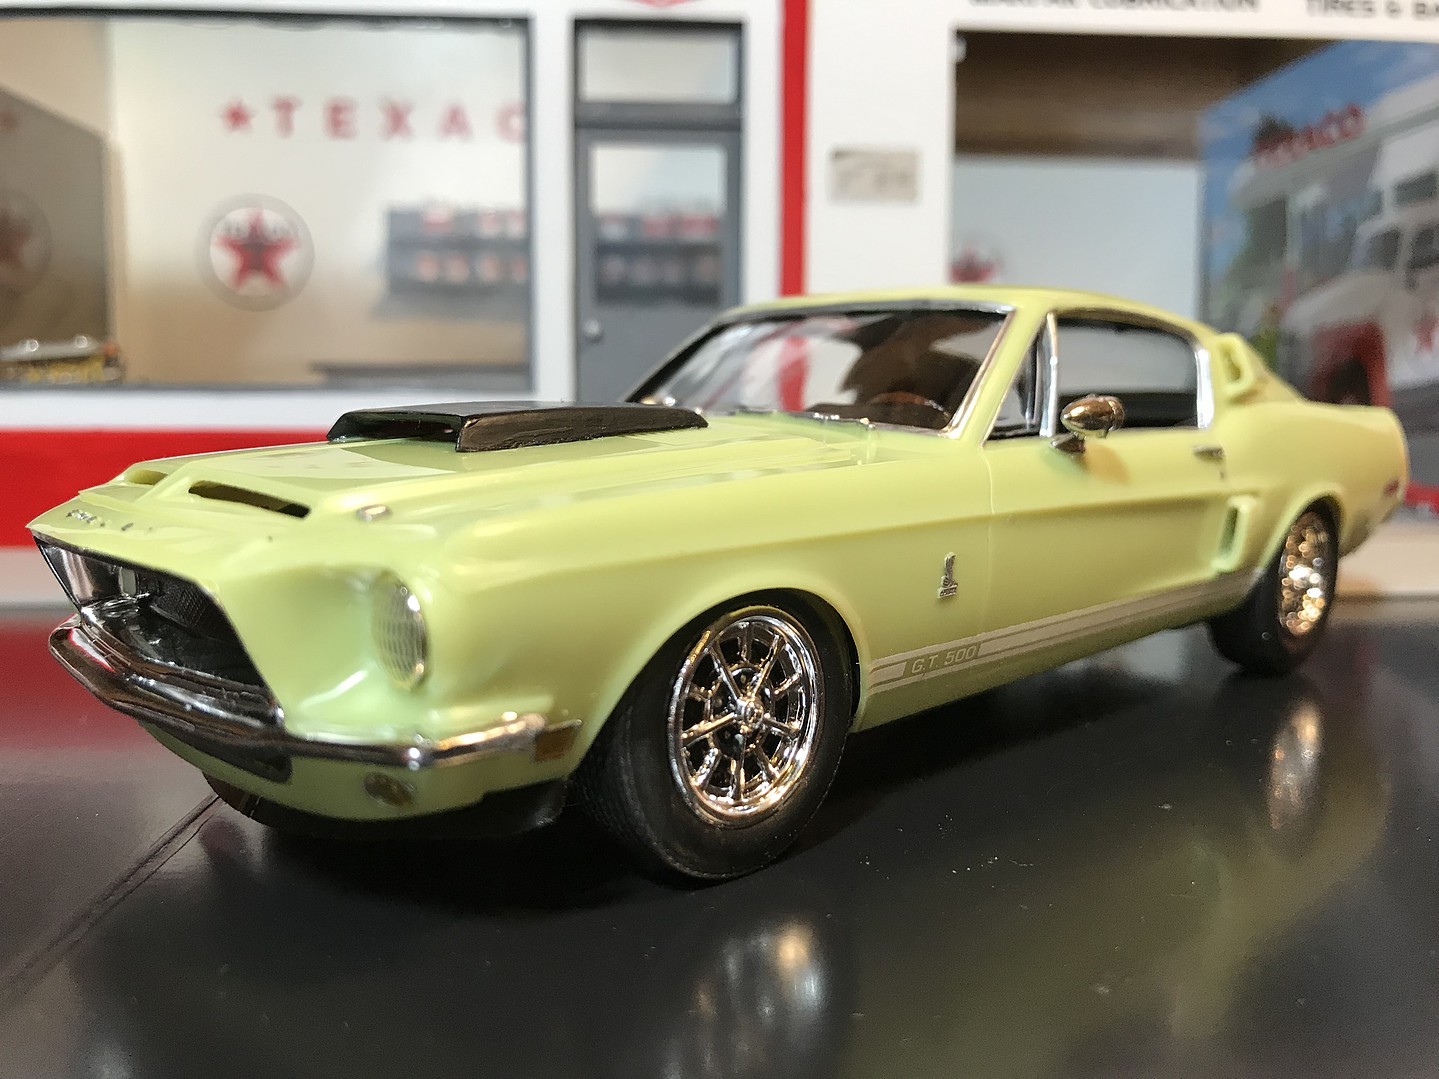 NEW SEALED 1968 FORD SHELBY GT500 MUSTANG AMT 1:25 SCALE PLASTIC MODEL 